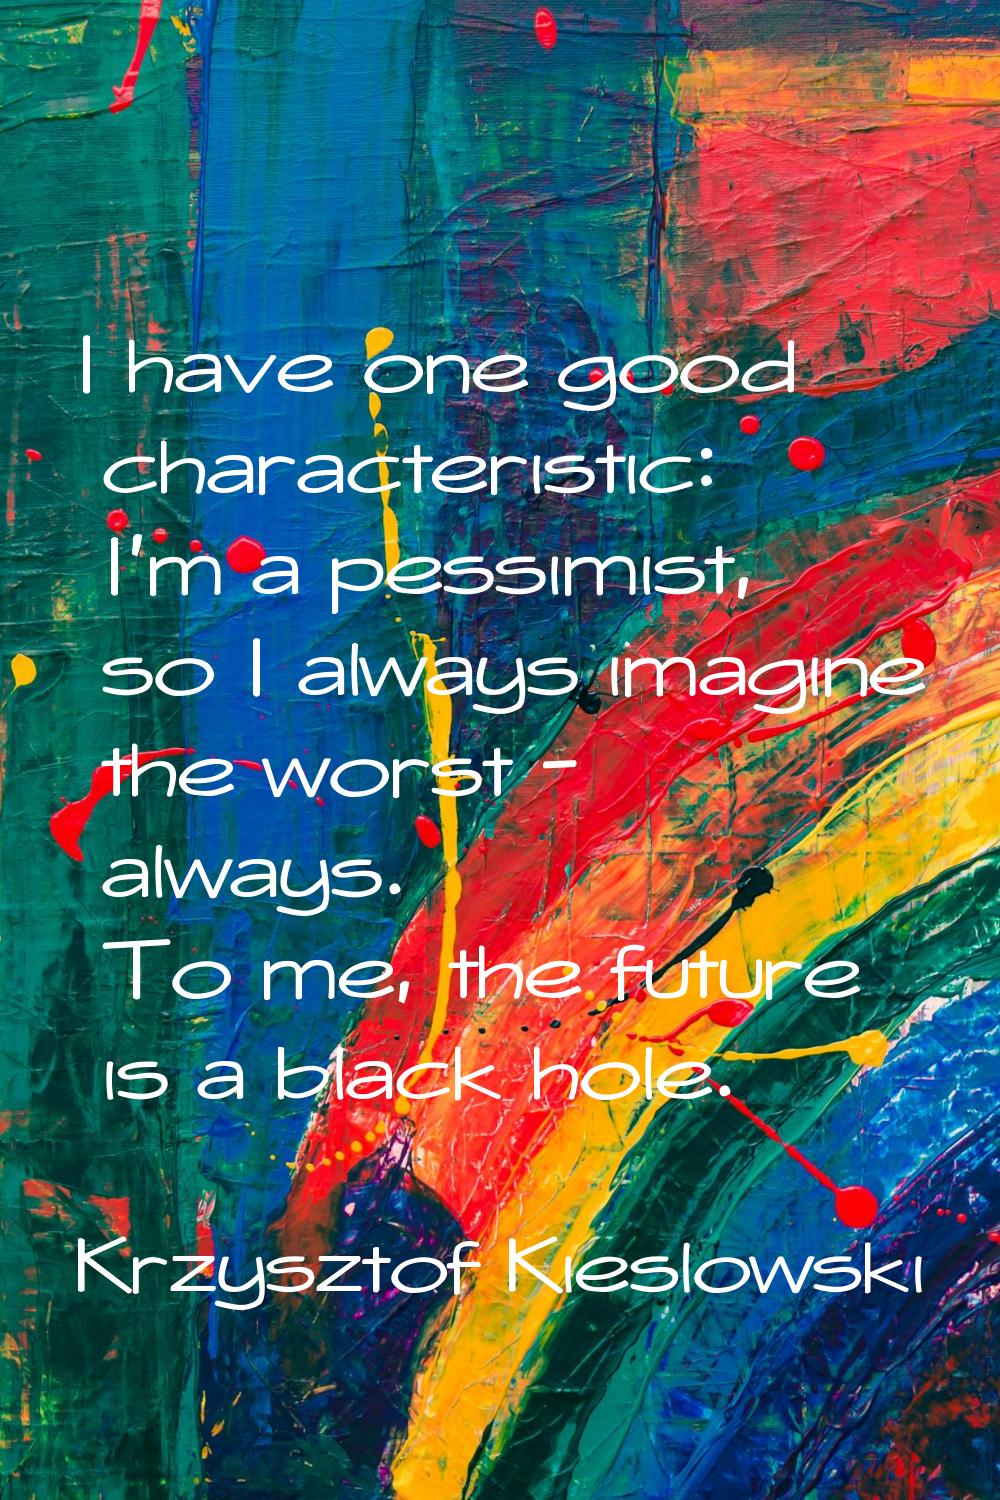 I have one good characteristic: I'm a pessimist, so I always imagine the worst - always. To me, the